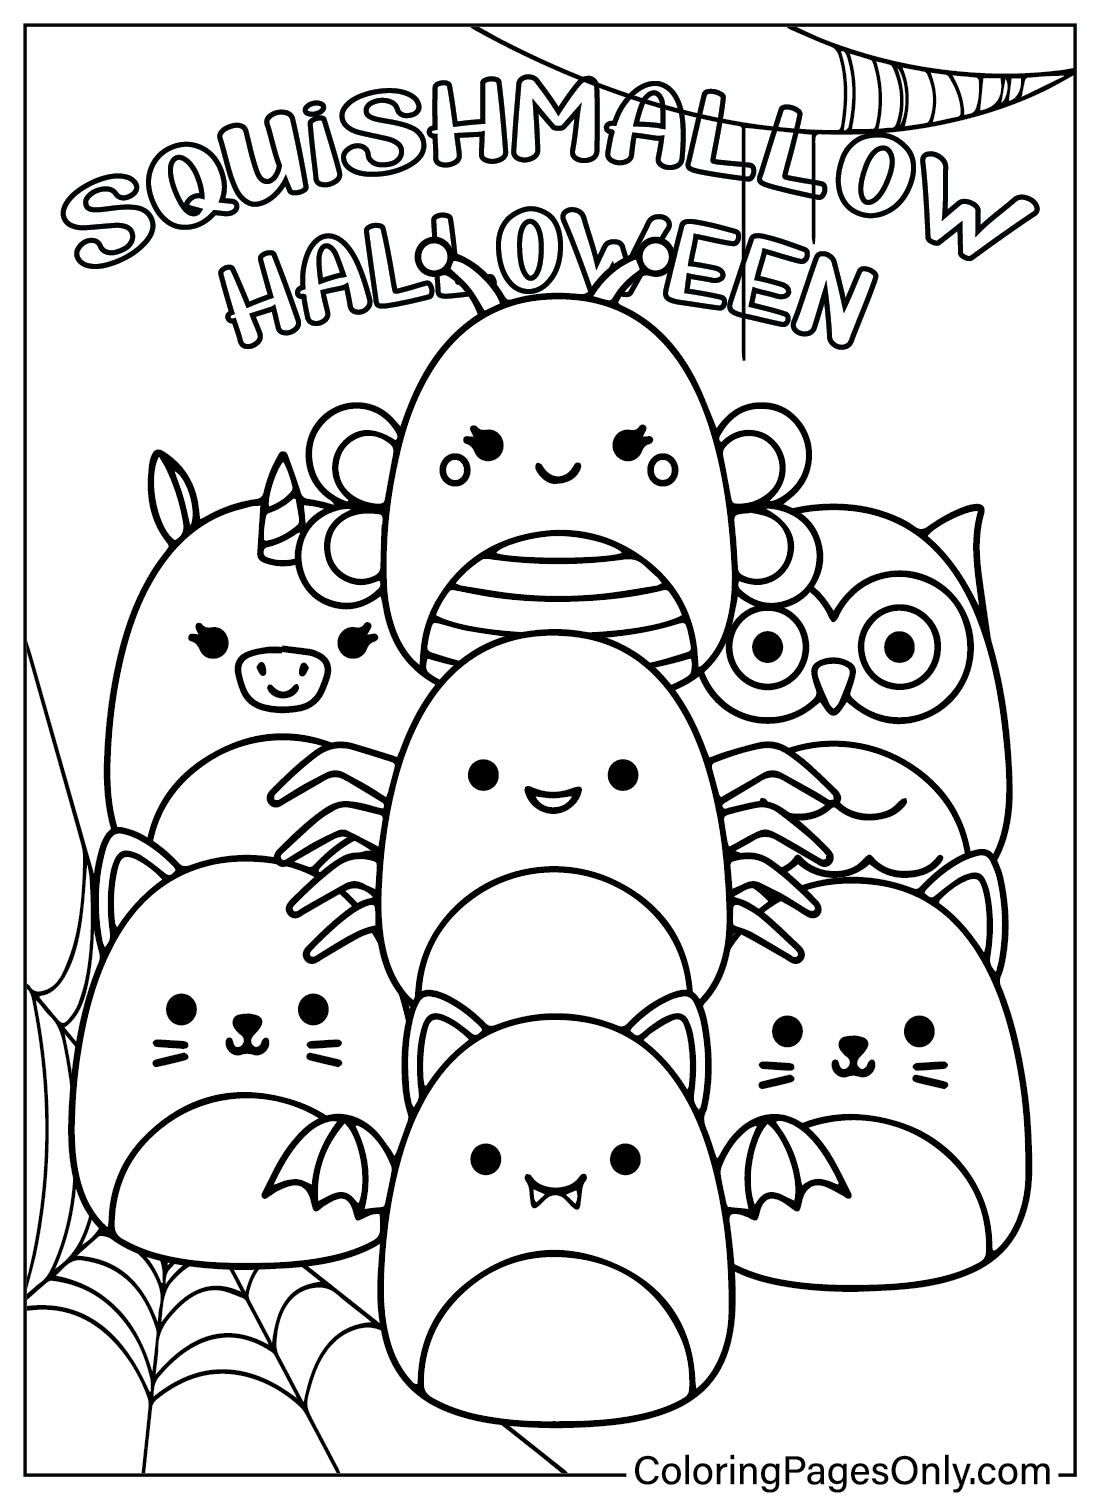 Squishmallow Halloween Coloring Pages - Free Printable Coloring Pages